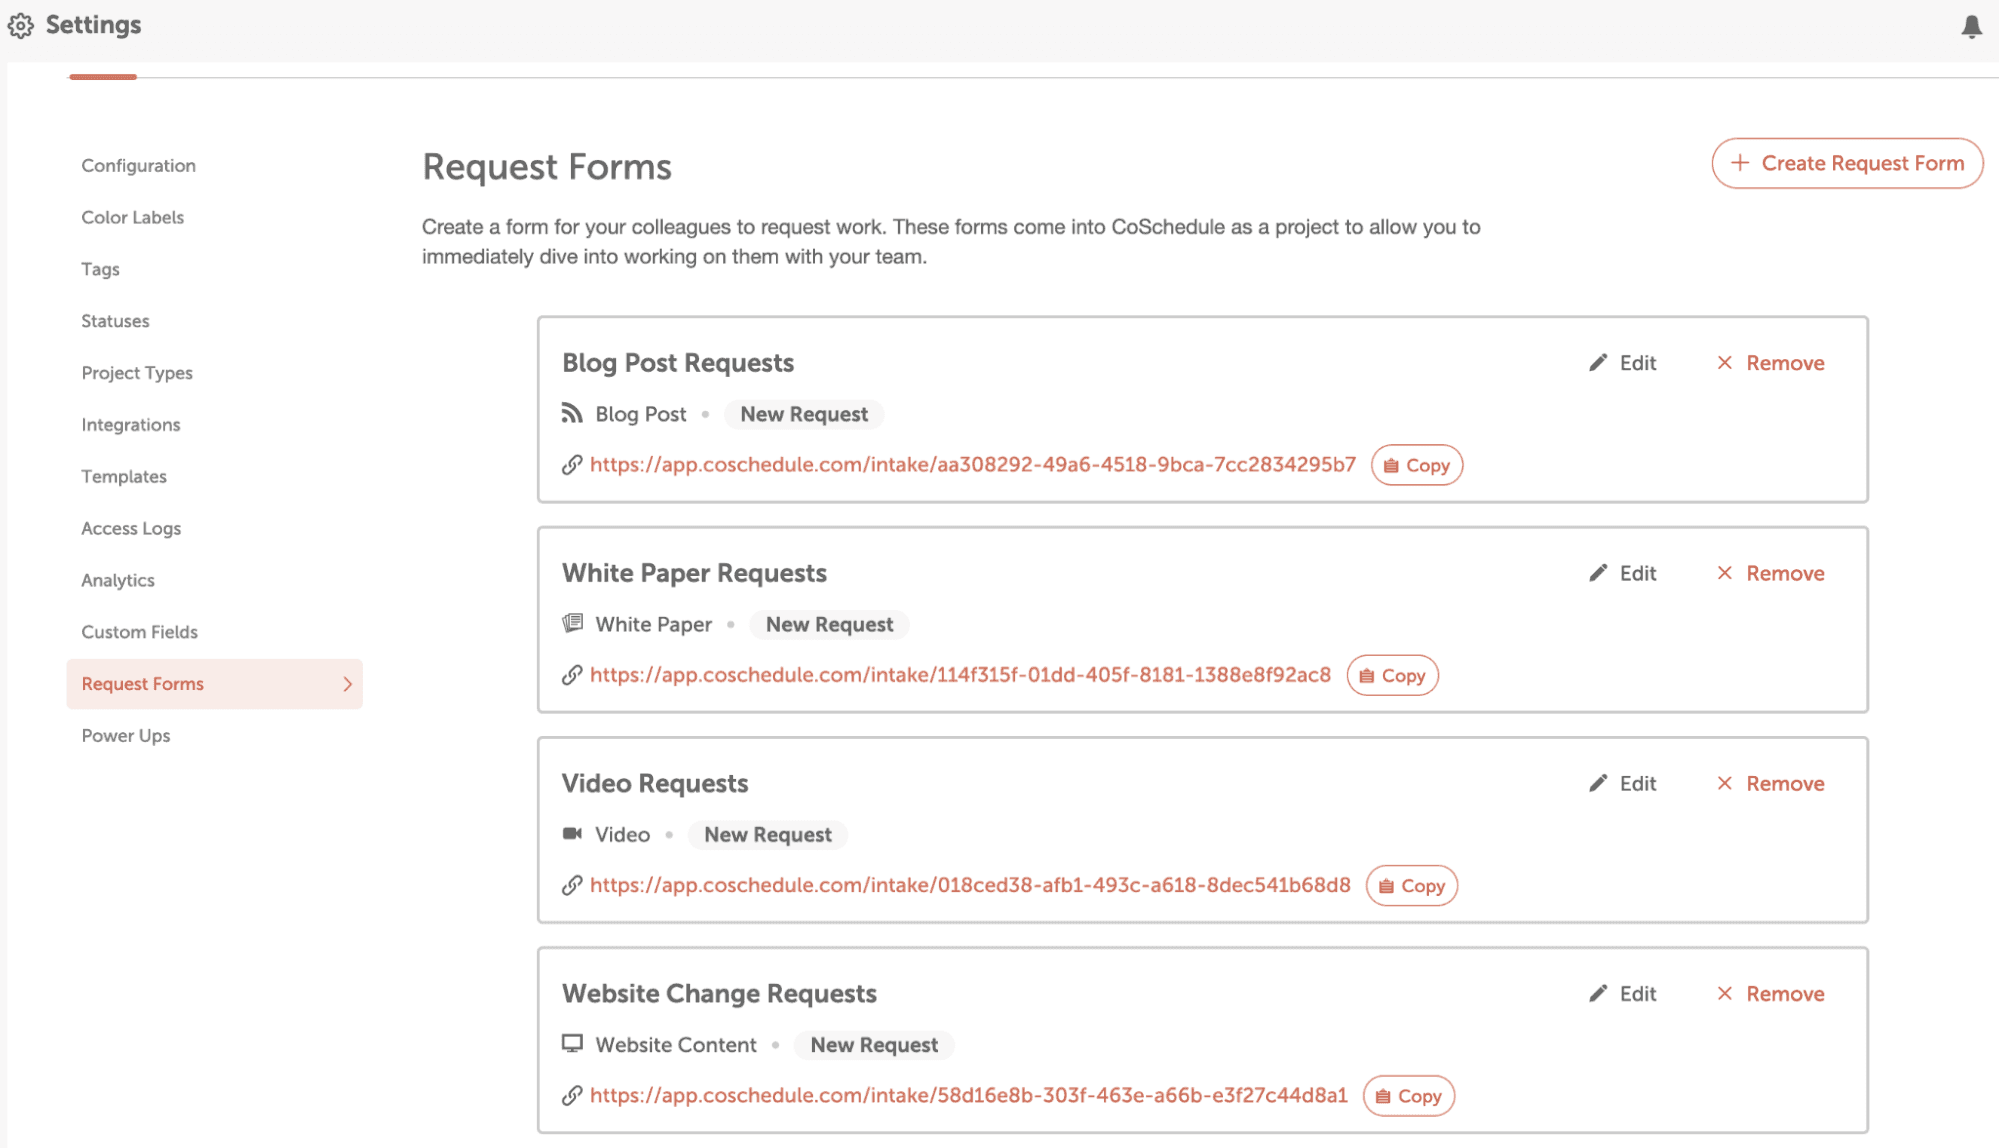 Build request forms for blogs, videos, white papers etc...